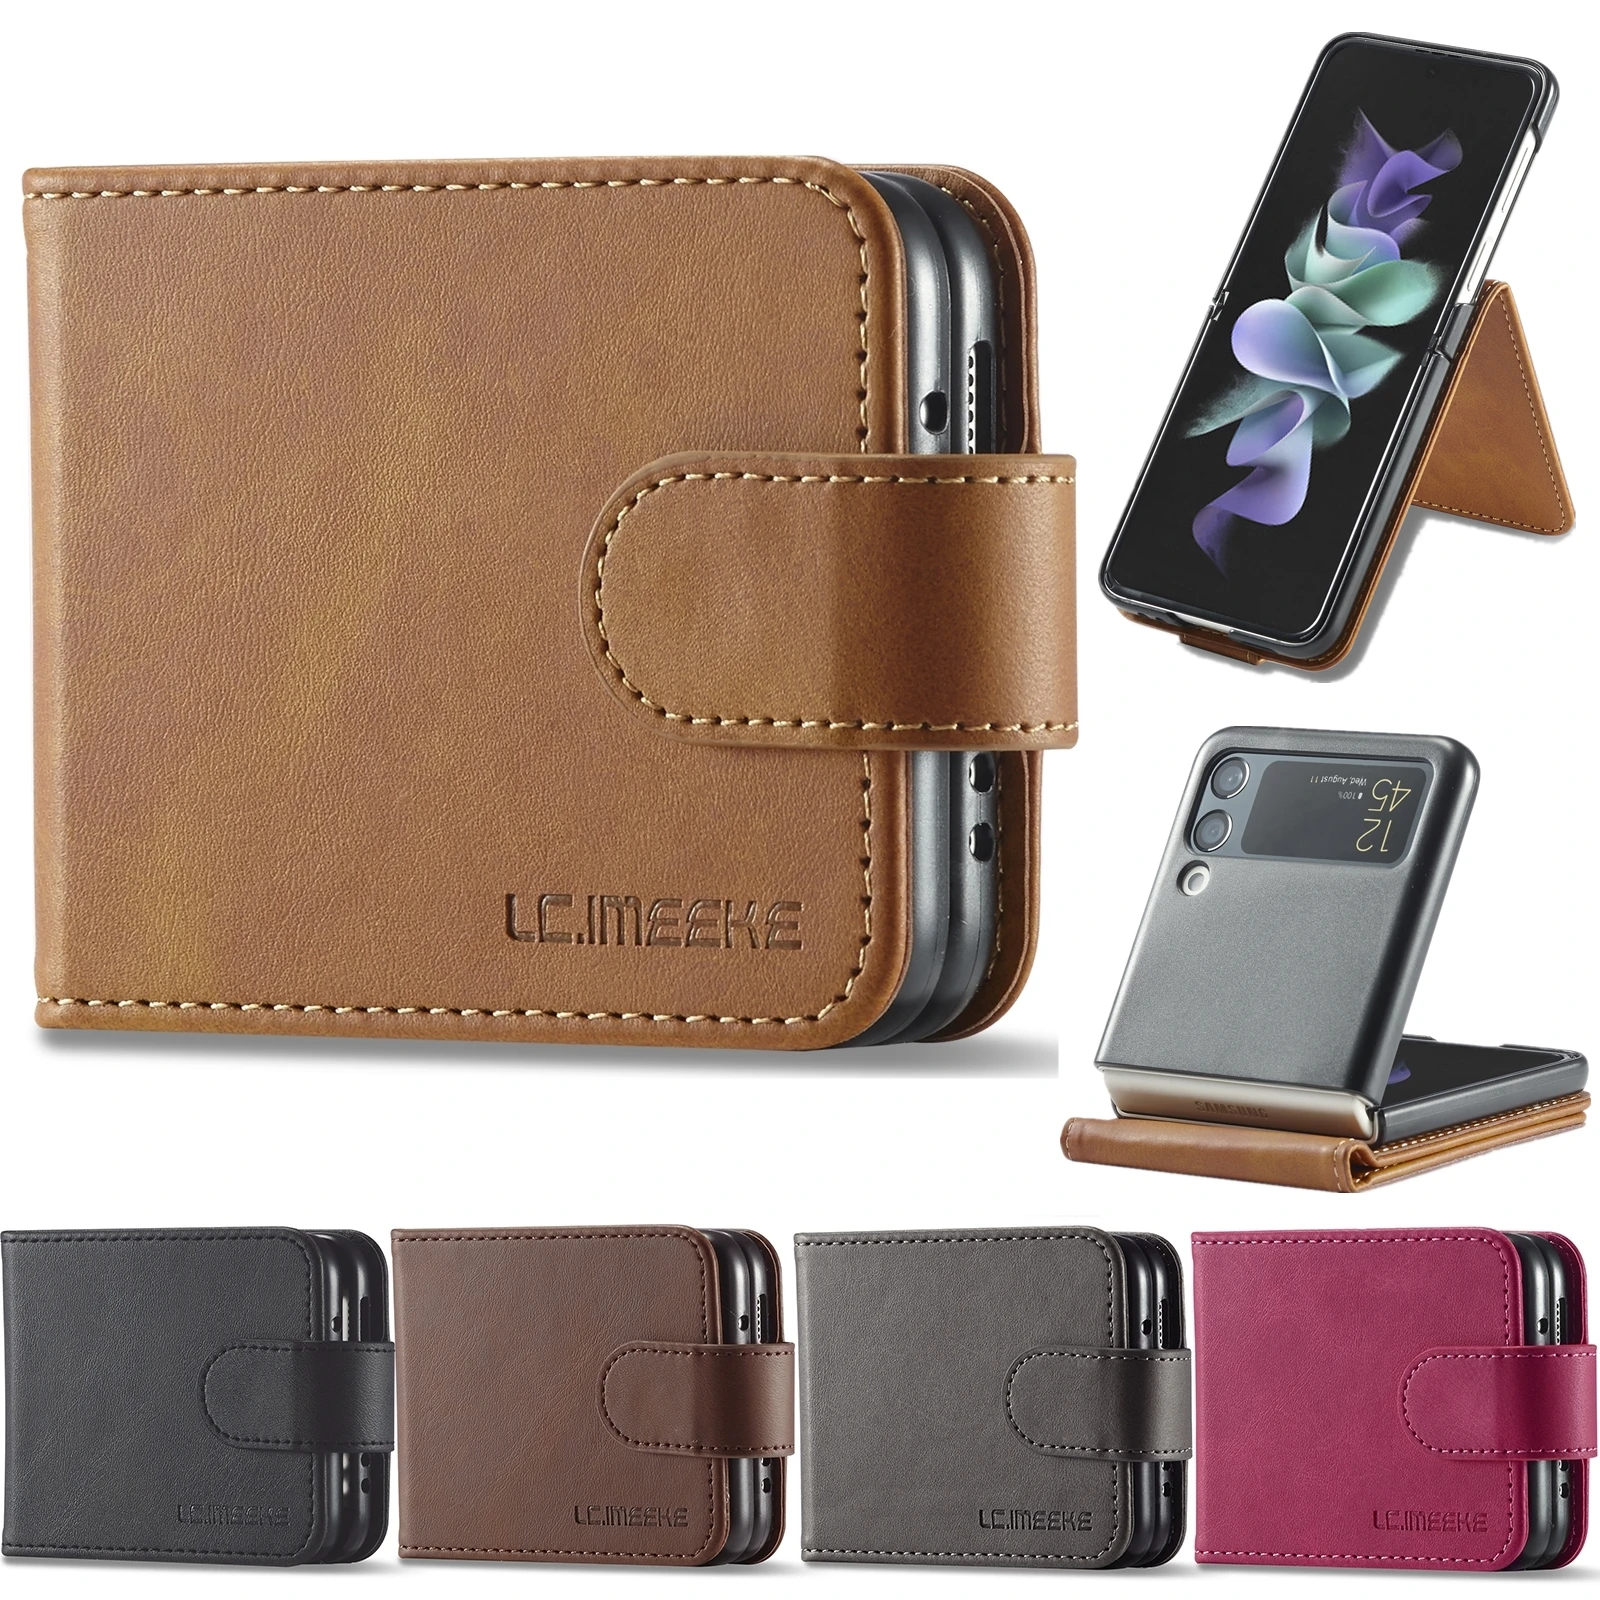 z flip3 case Business Leather Case For Sumsung Galaxy Z Flip 4 3 5G Drop Protection Phone Cover for Z Flip4 Flip3 Ultra Slim Stand Coque Etui samsung flip3 case